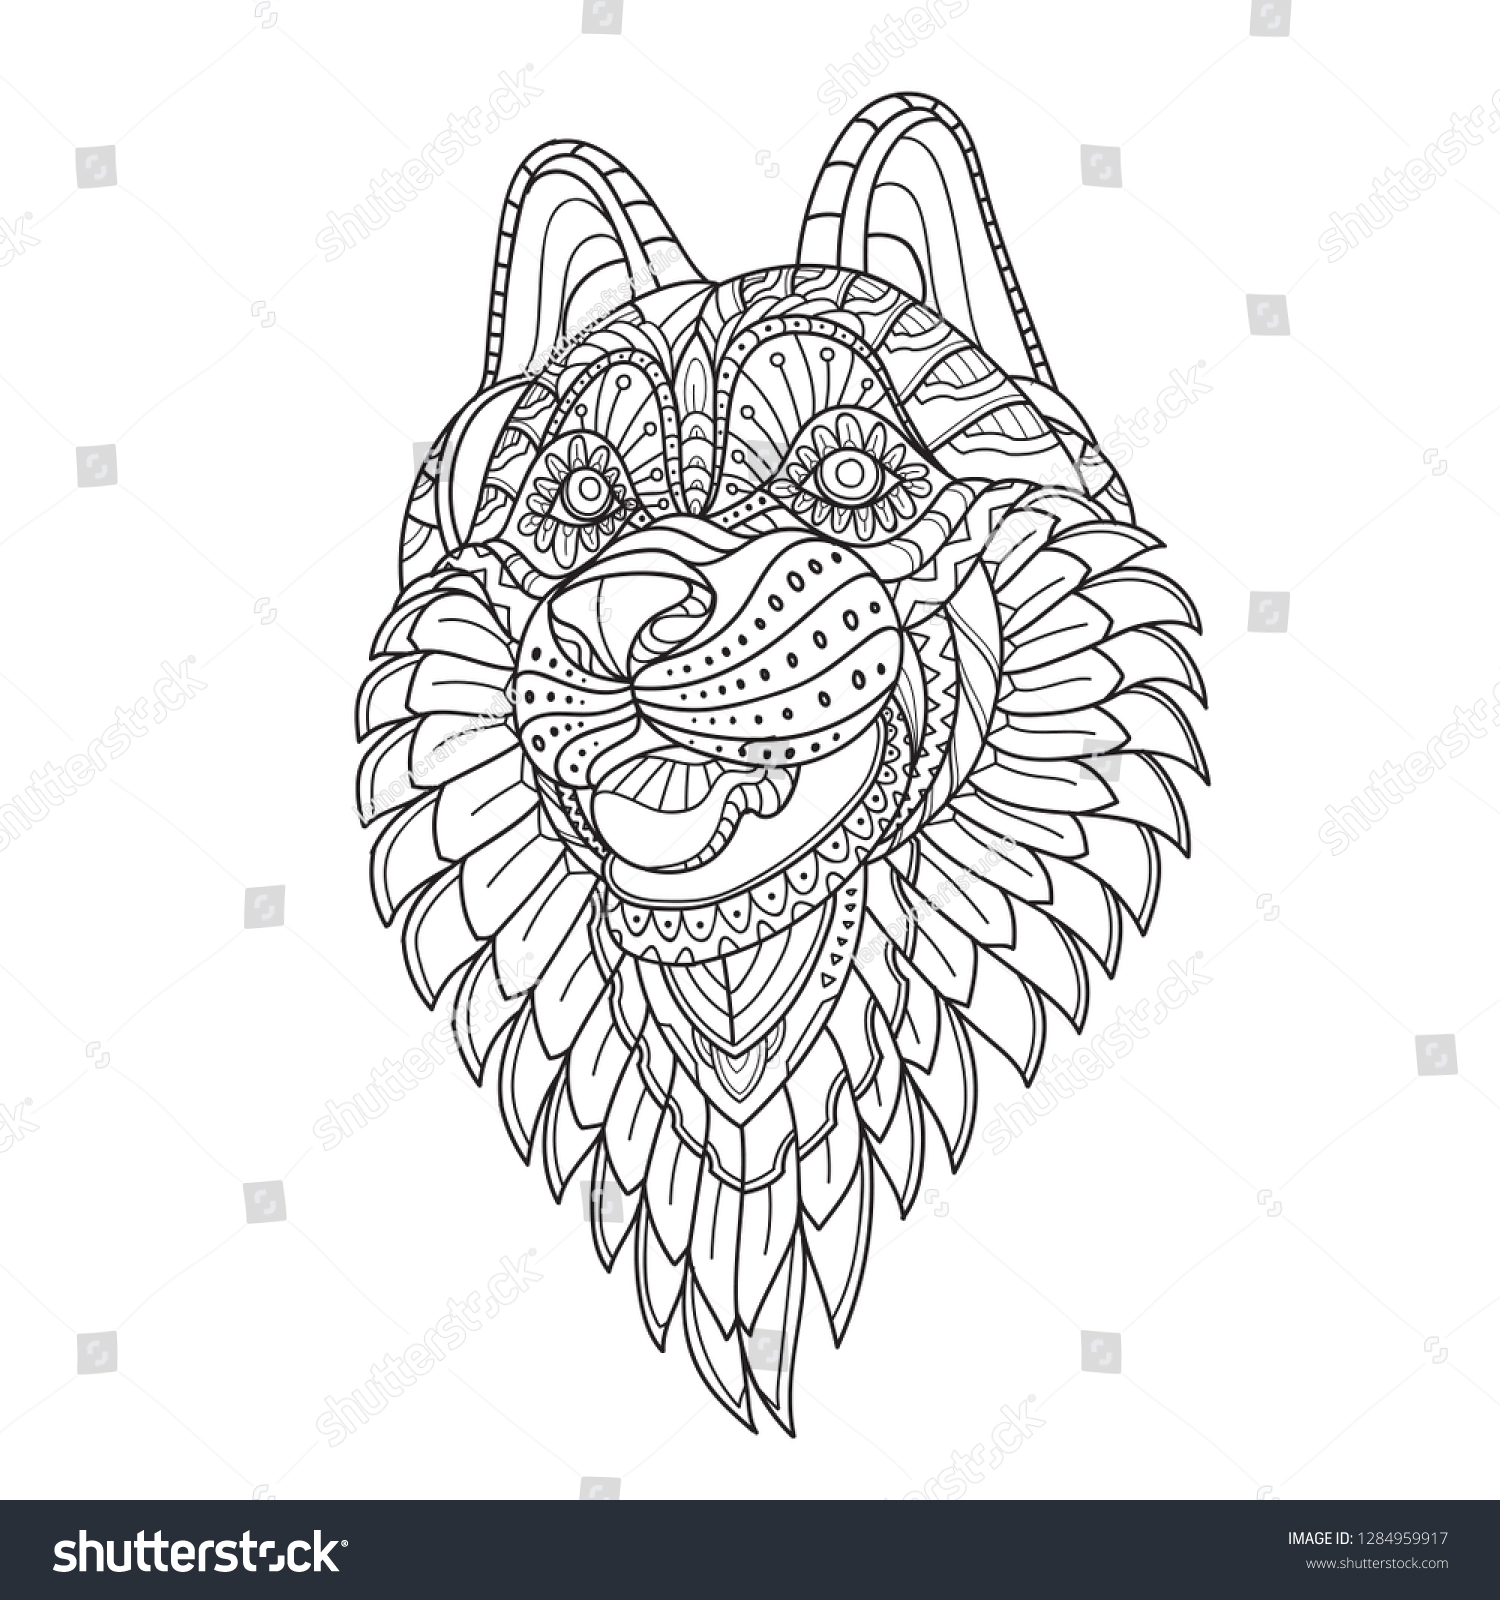 SVG of zentangle wolf. zentangle animal. Hand drawn doodle zentangle wolf head illustration. Decorative ornate vector wolf head drawing for coloring book -Vector svg